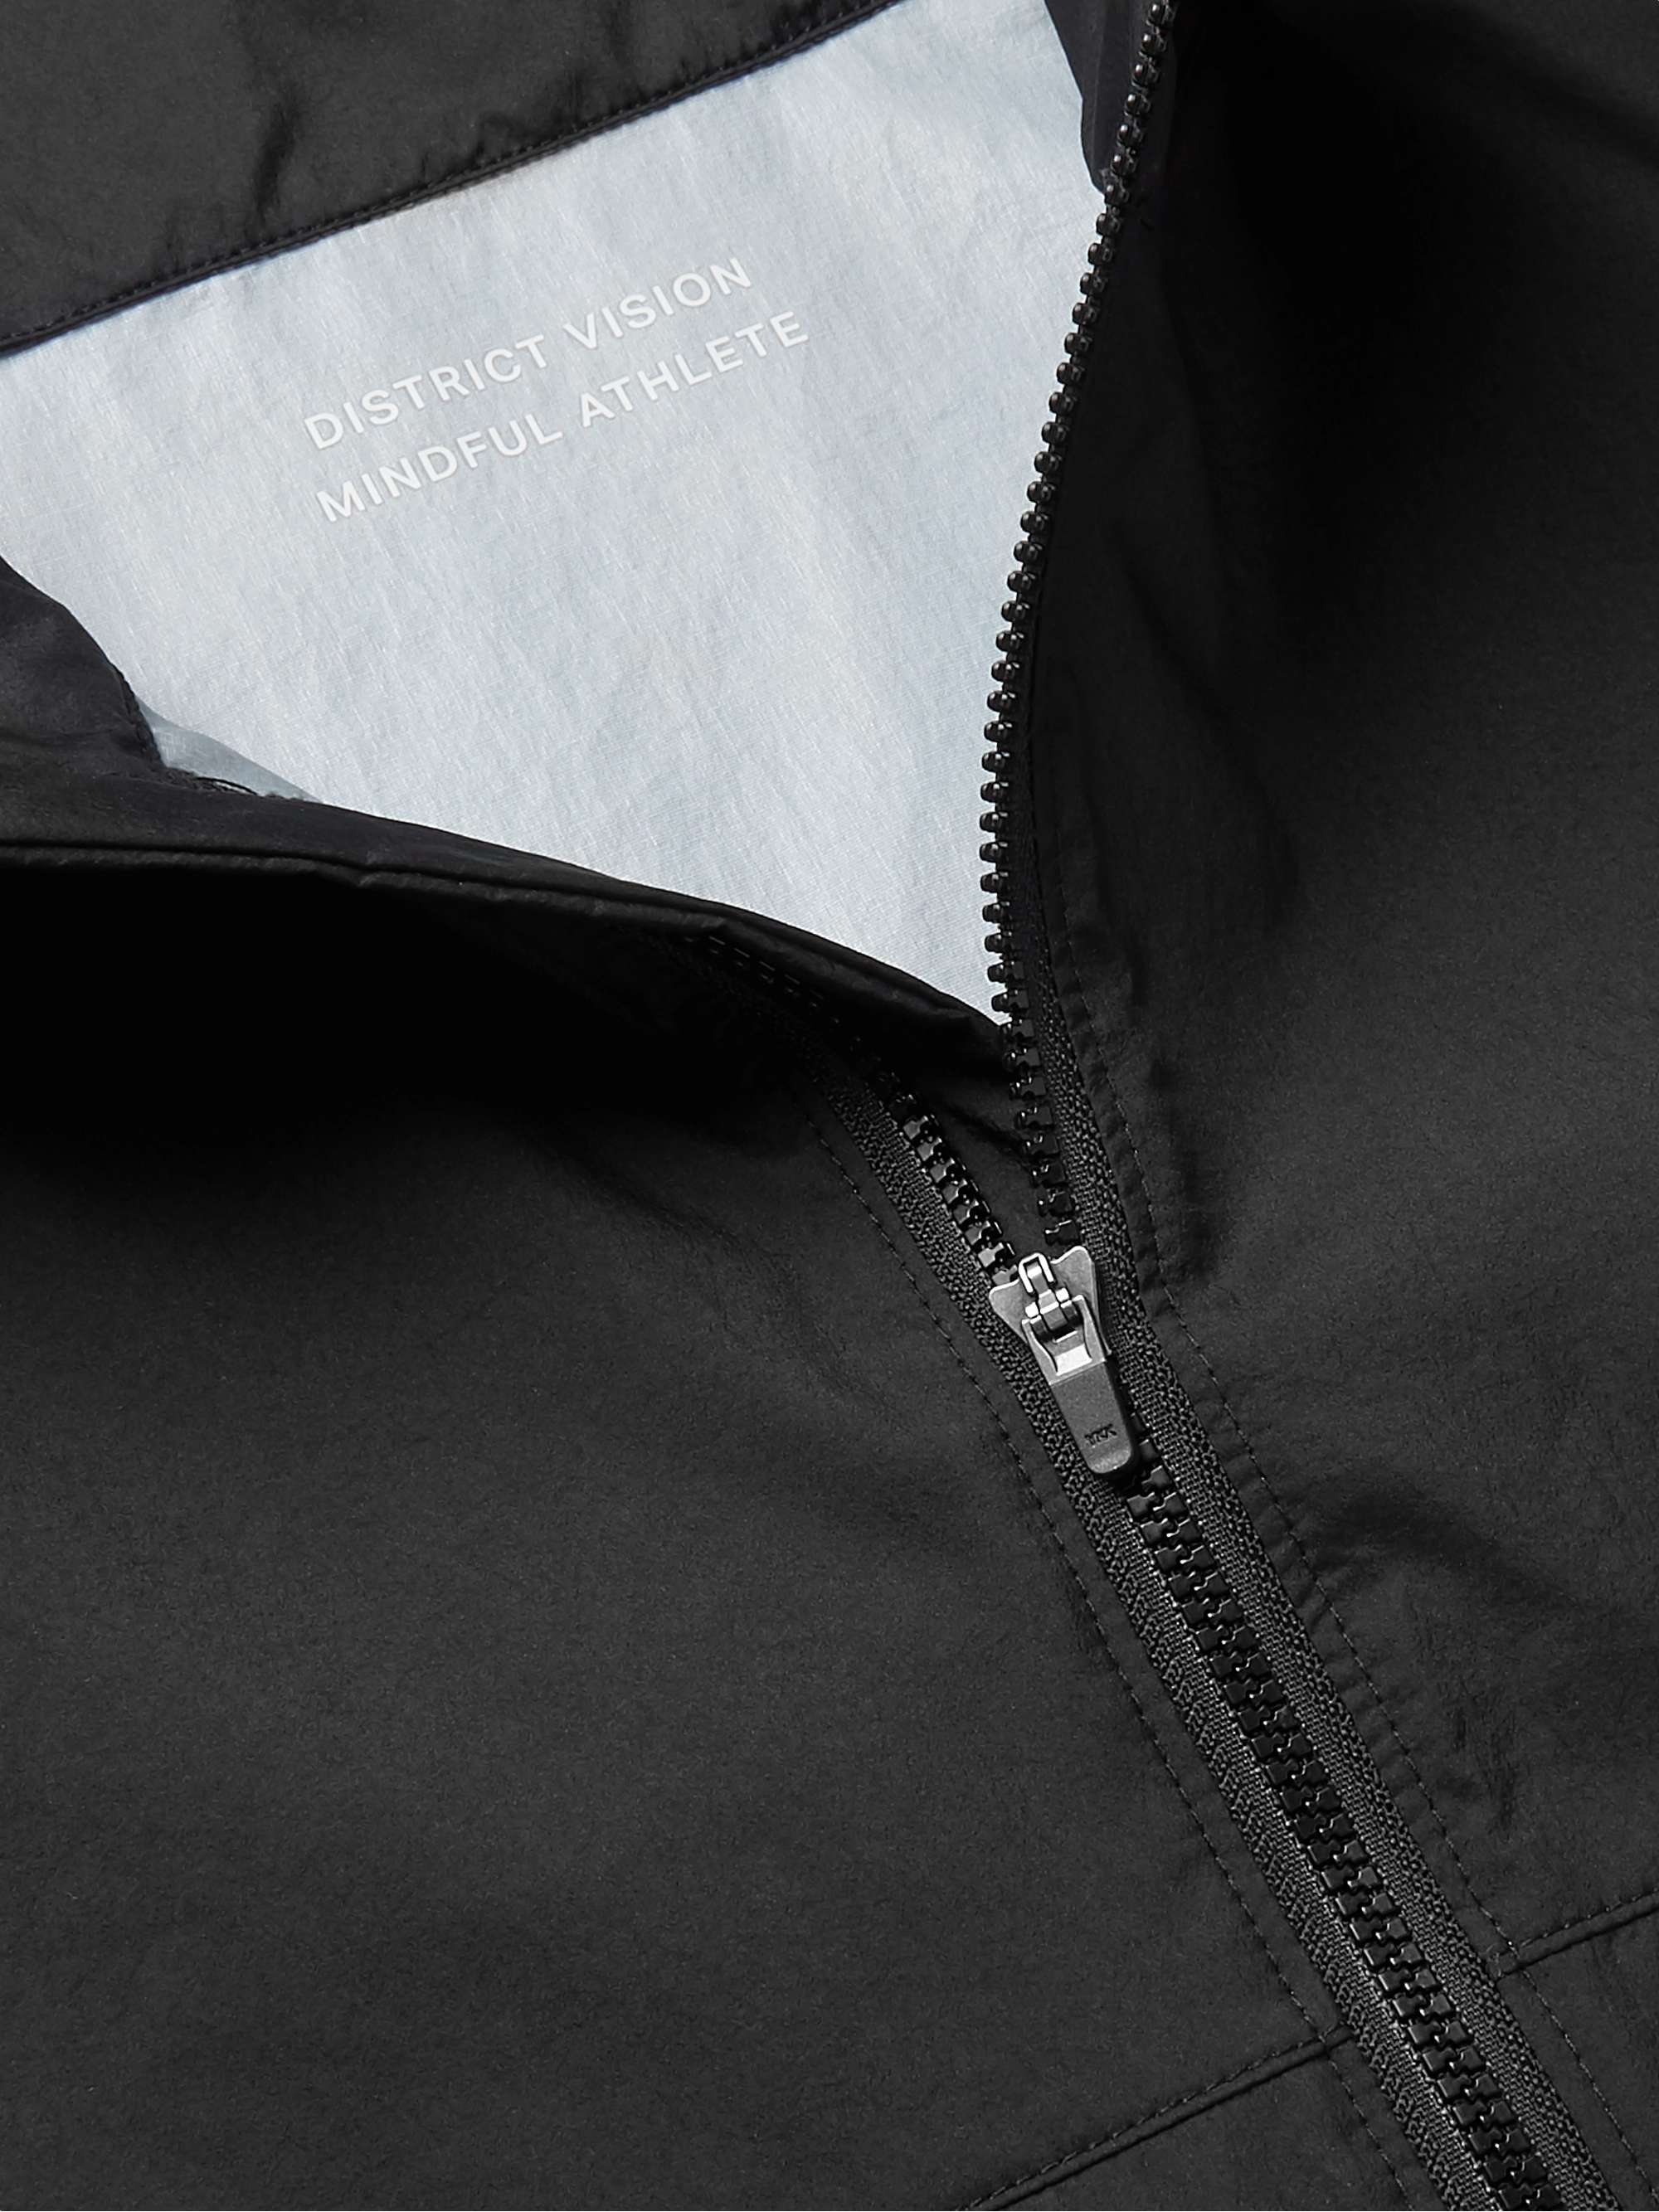 DISTRICT VISION + MR PORTER Health In Mind Theo Colour-Block Shell Half-Zip Jacket